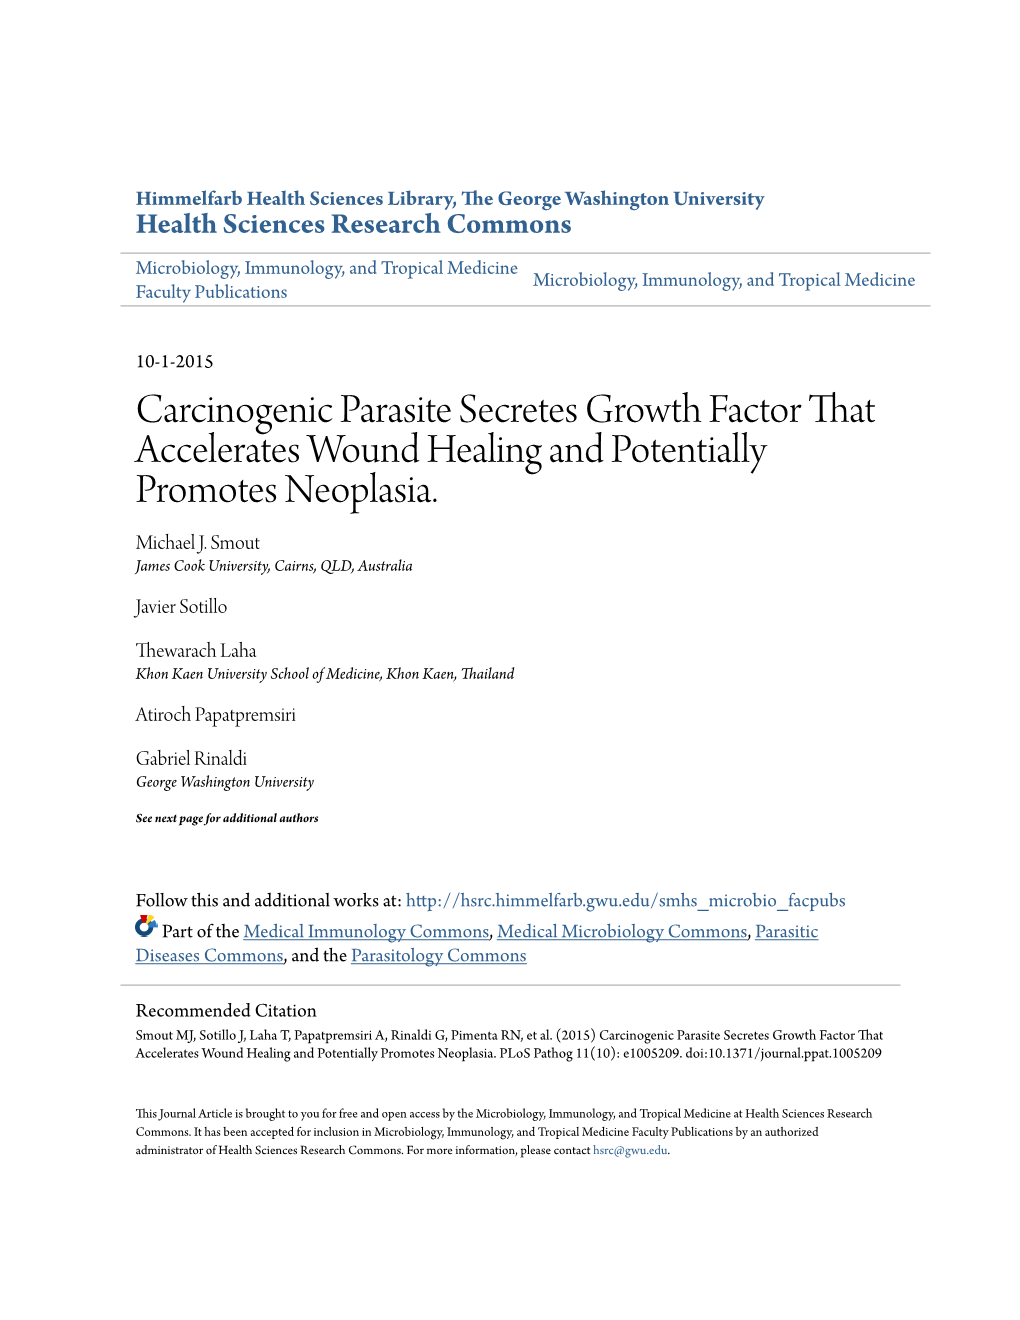 Carcinogenic Parasite Secretes Growth Factor That Accelerates Wound Healing and Potentially Promotes Neoplasia